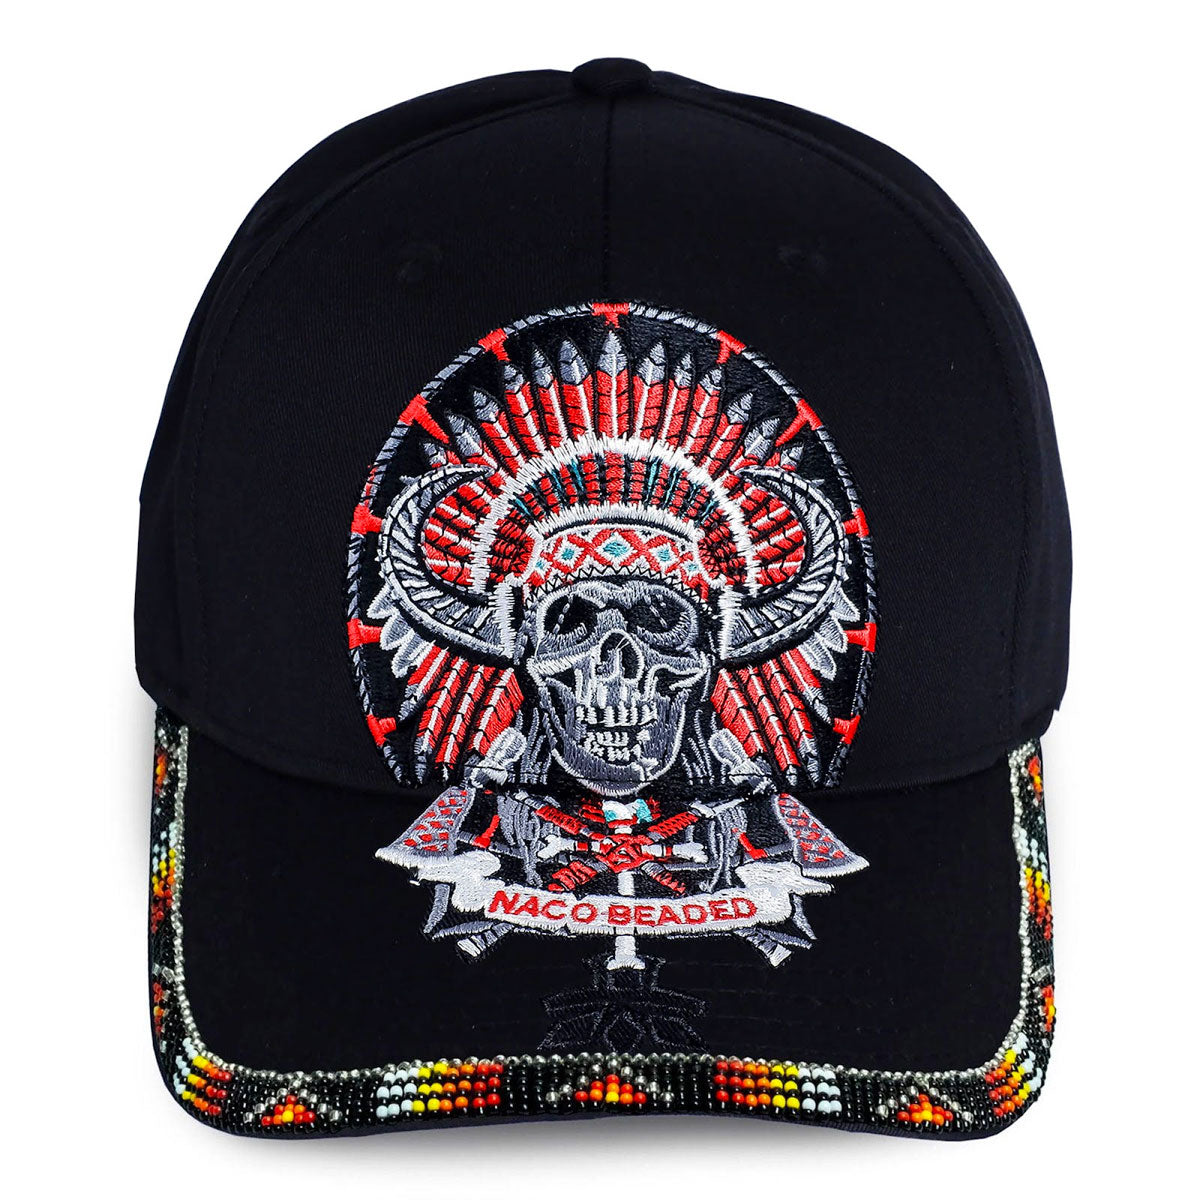 SALE 50% OFF - Skull Headdress Embroidered Beaded Baseball Cap With Brim Unisex Native American Style